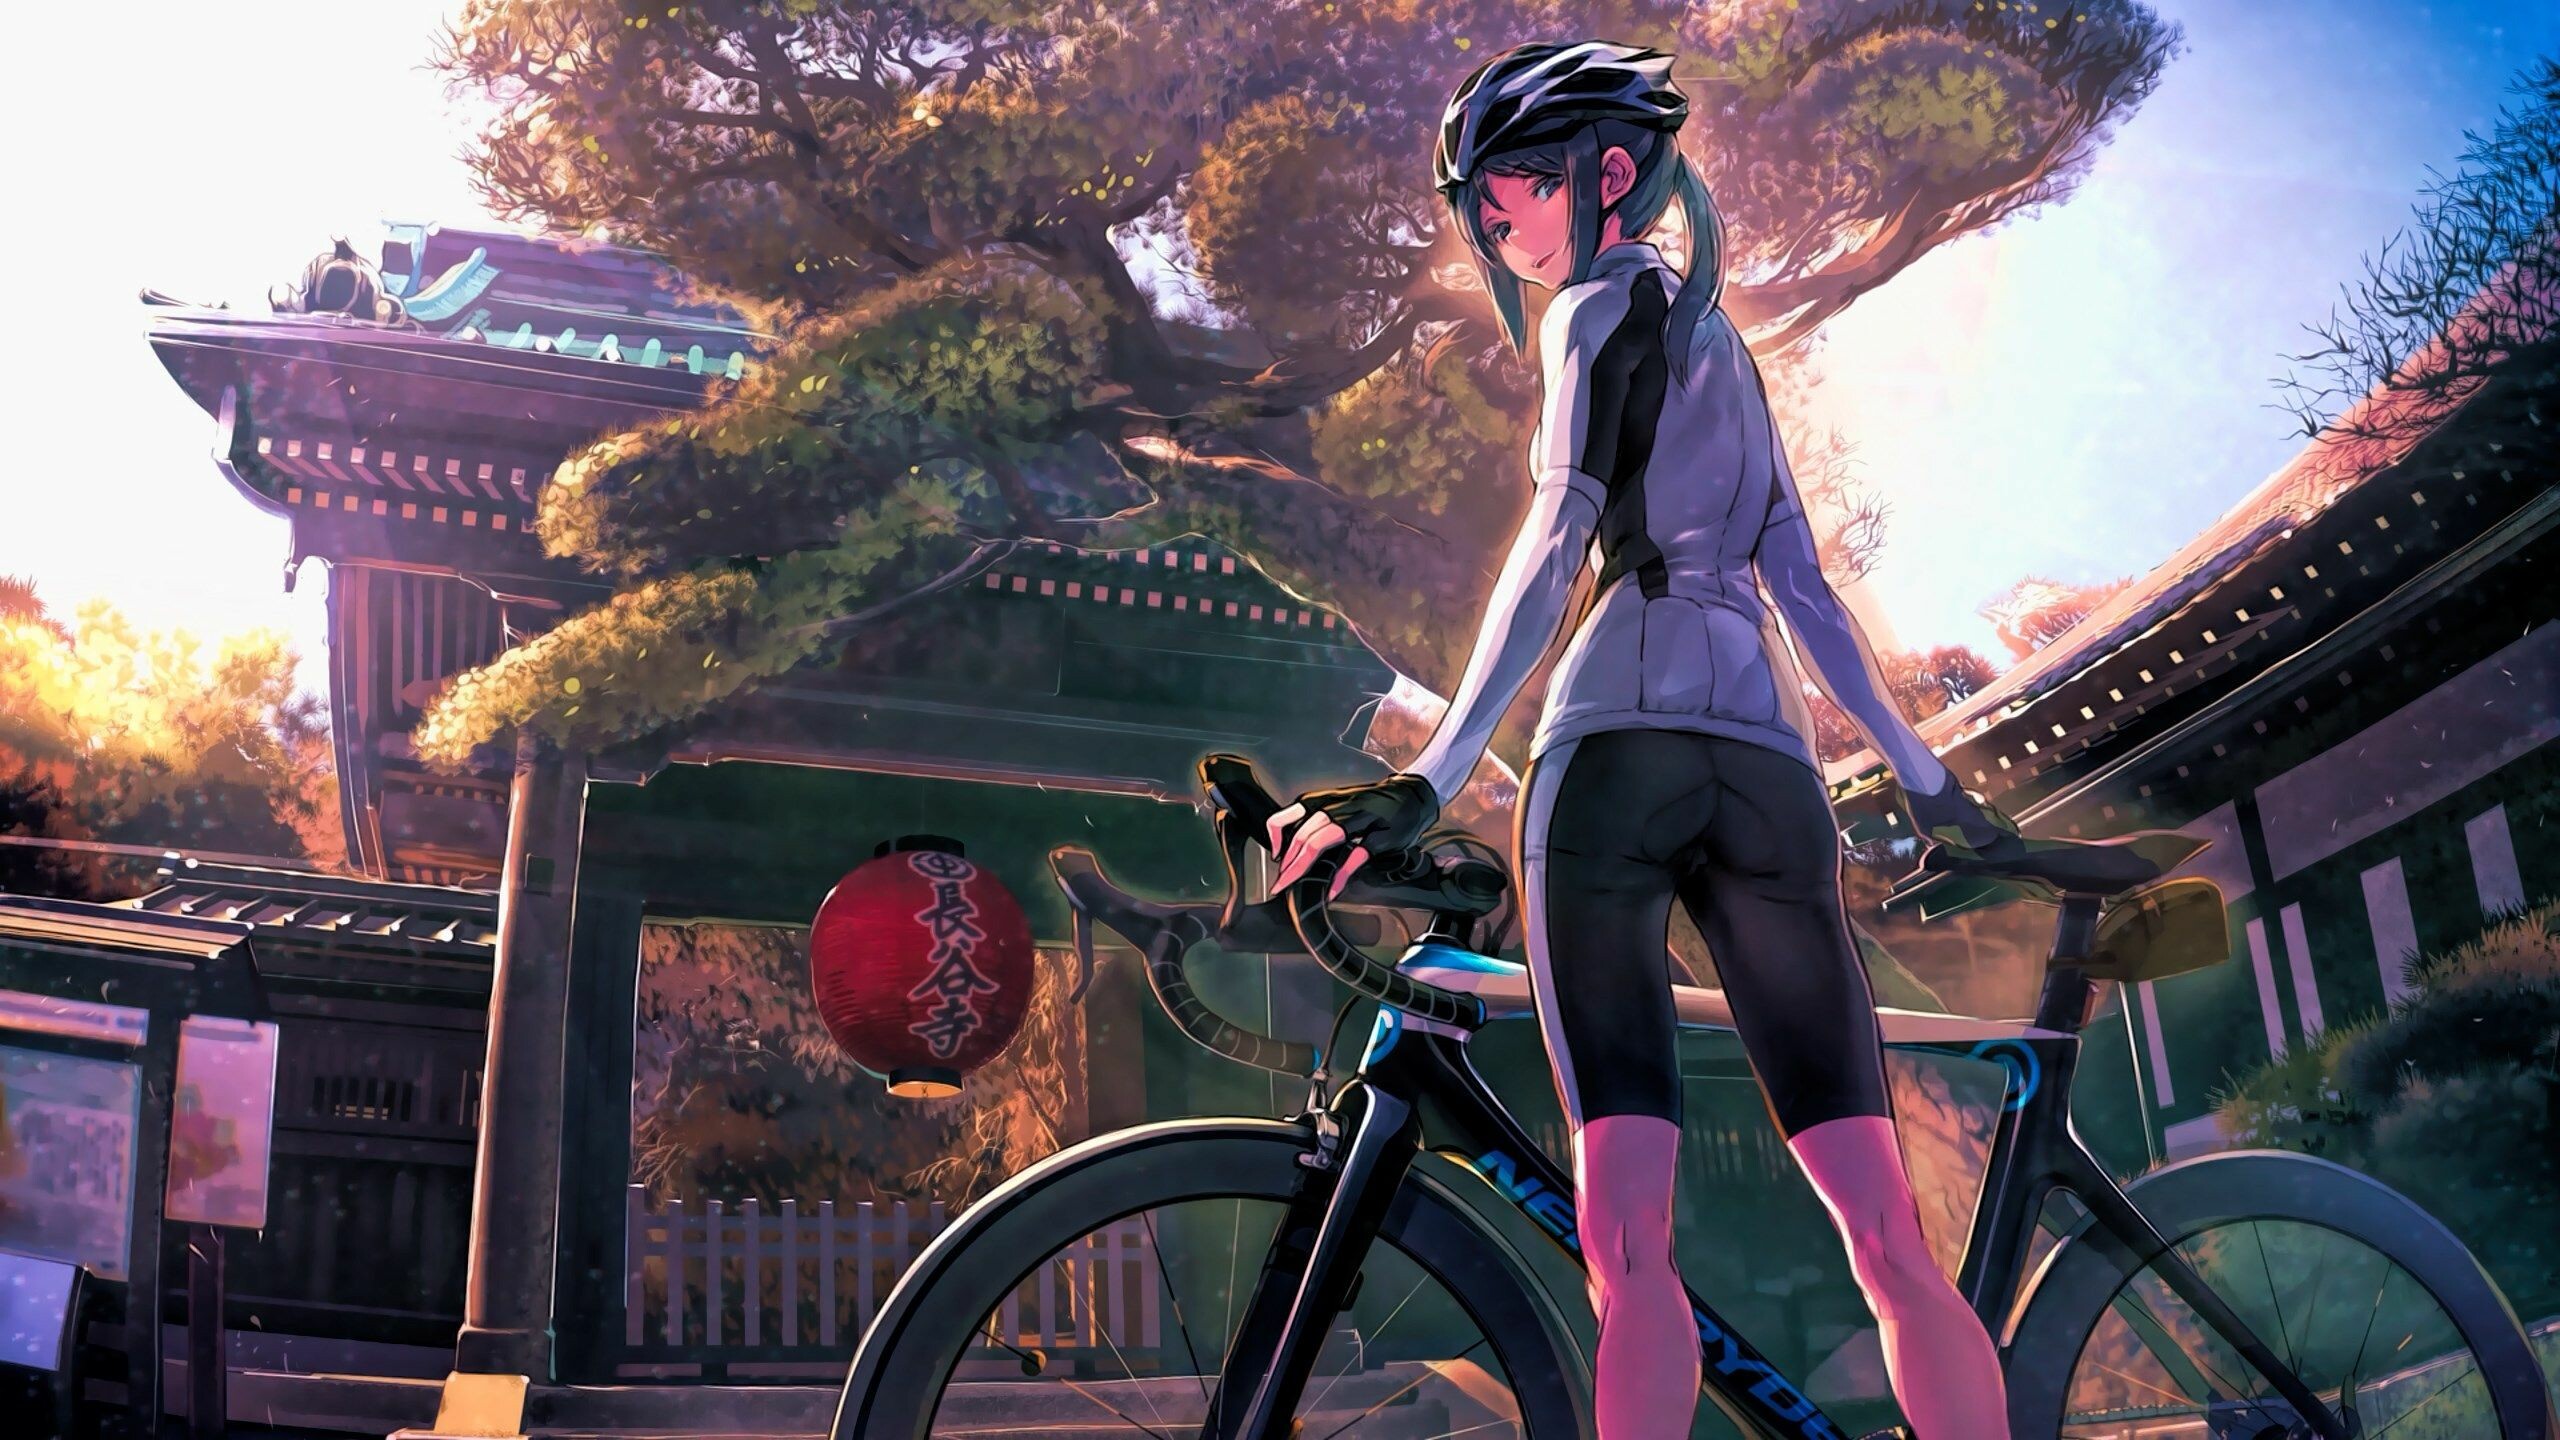 Yowamushi Pedal anime, Captivating cycling wallpapers, Stunning HD backgrounds, Thrilling scenes, 2560x1440 HD Desktop